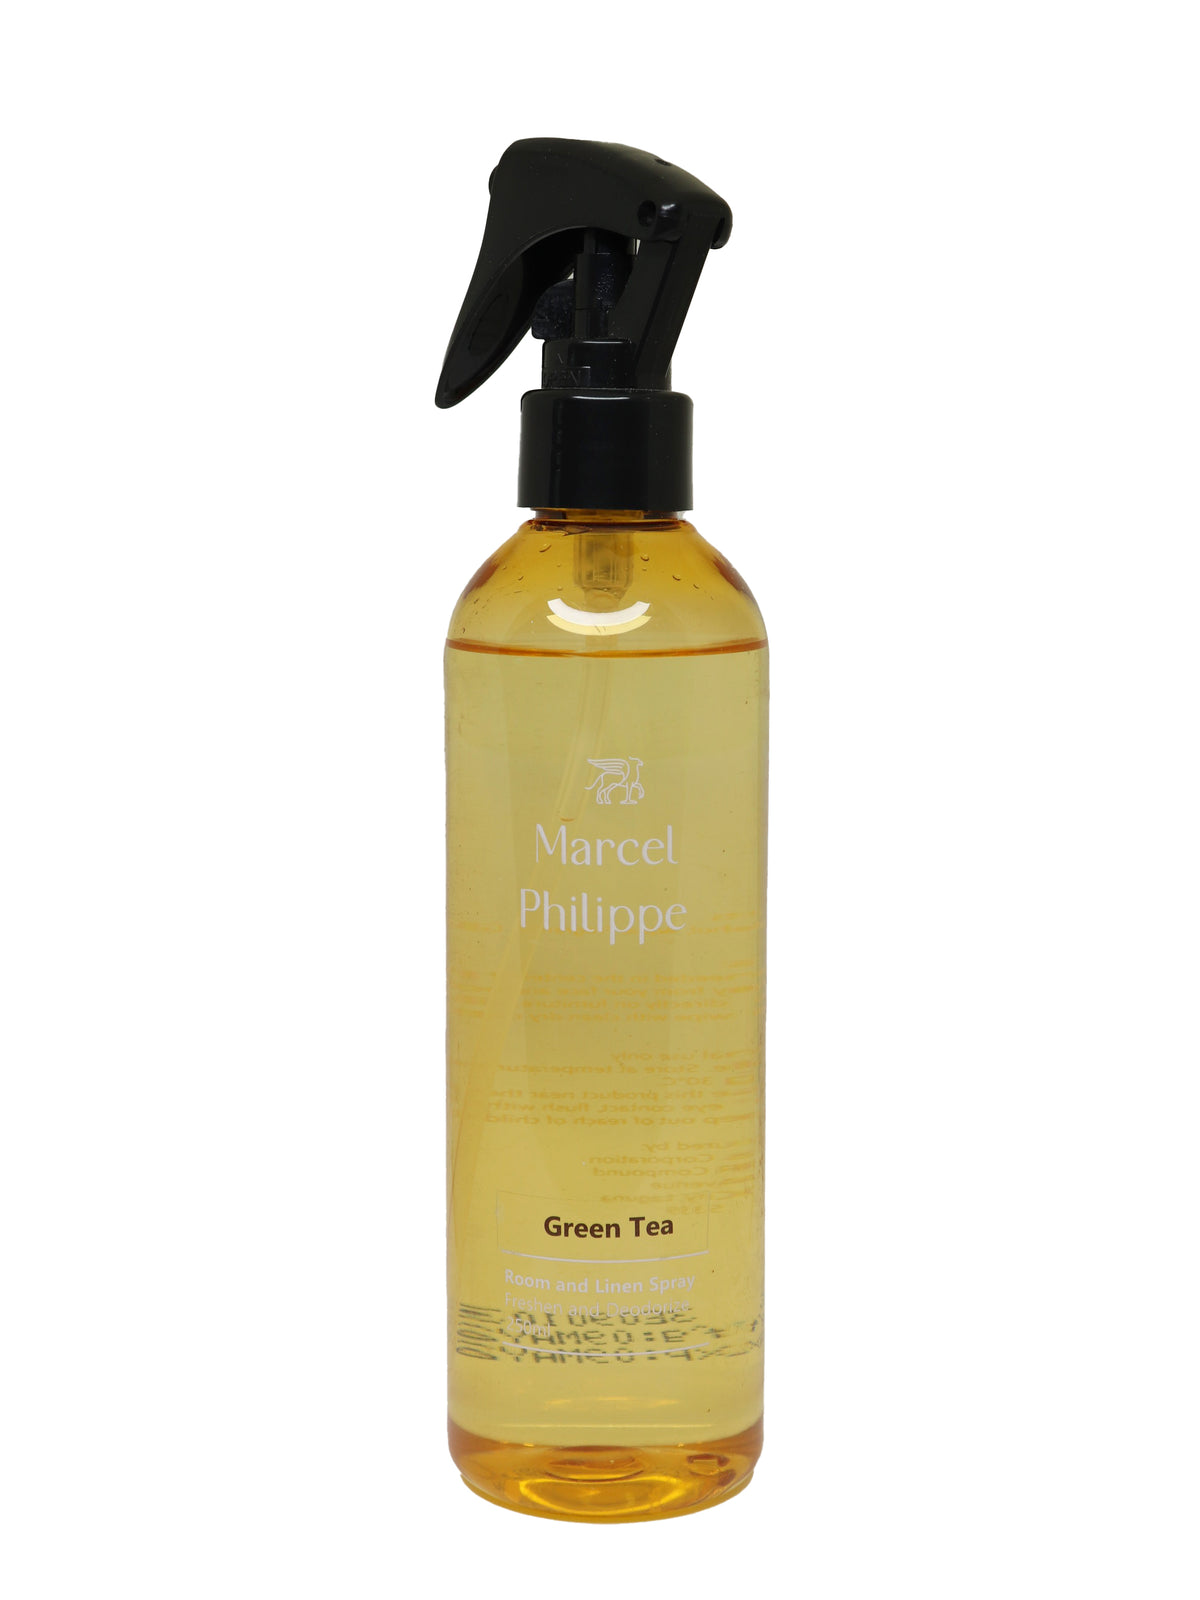 Marcel Philippe Room and Linen Spray 250ml